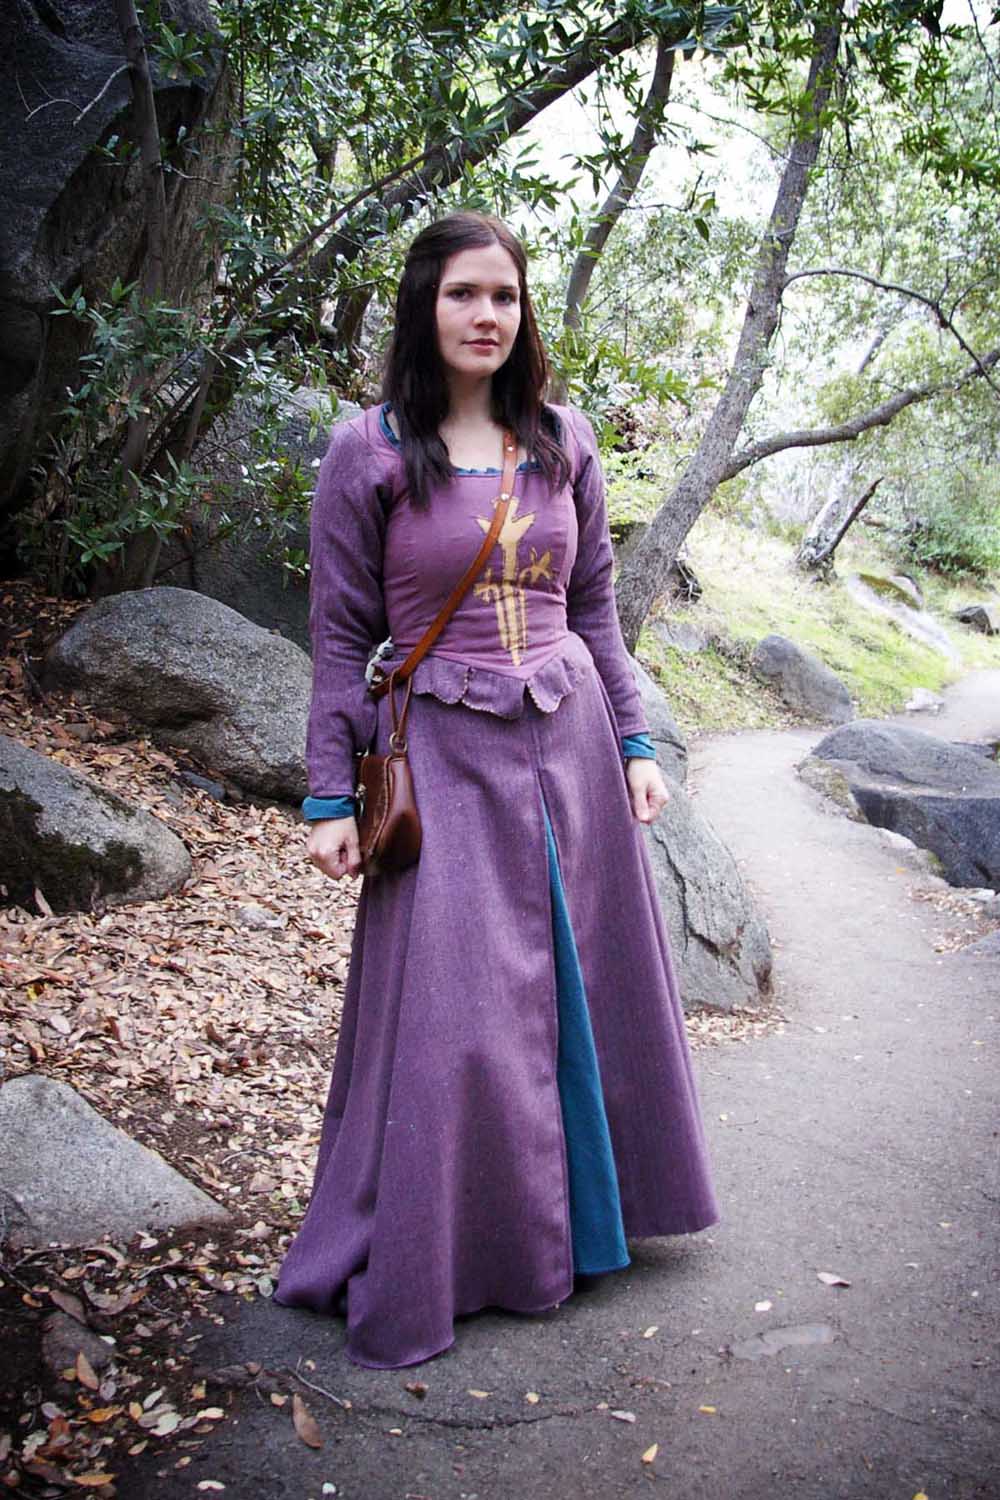 Susan Pevensie From Chronicles Of Narnia By Anime Wench.